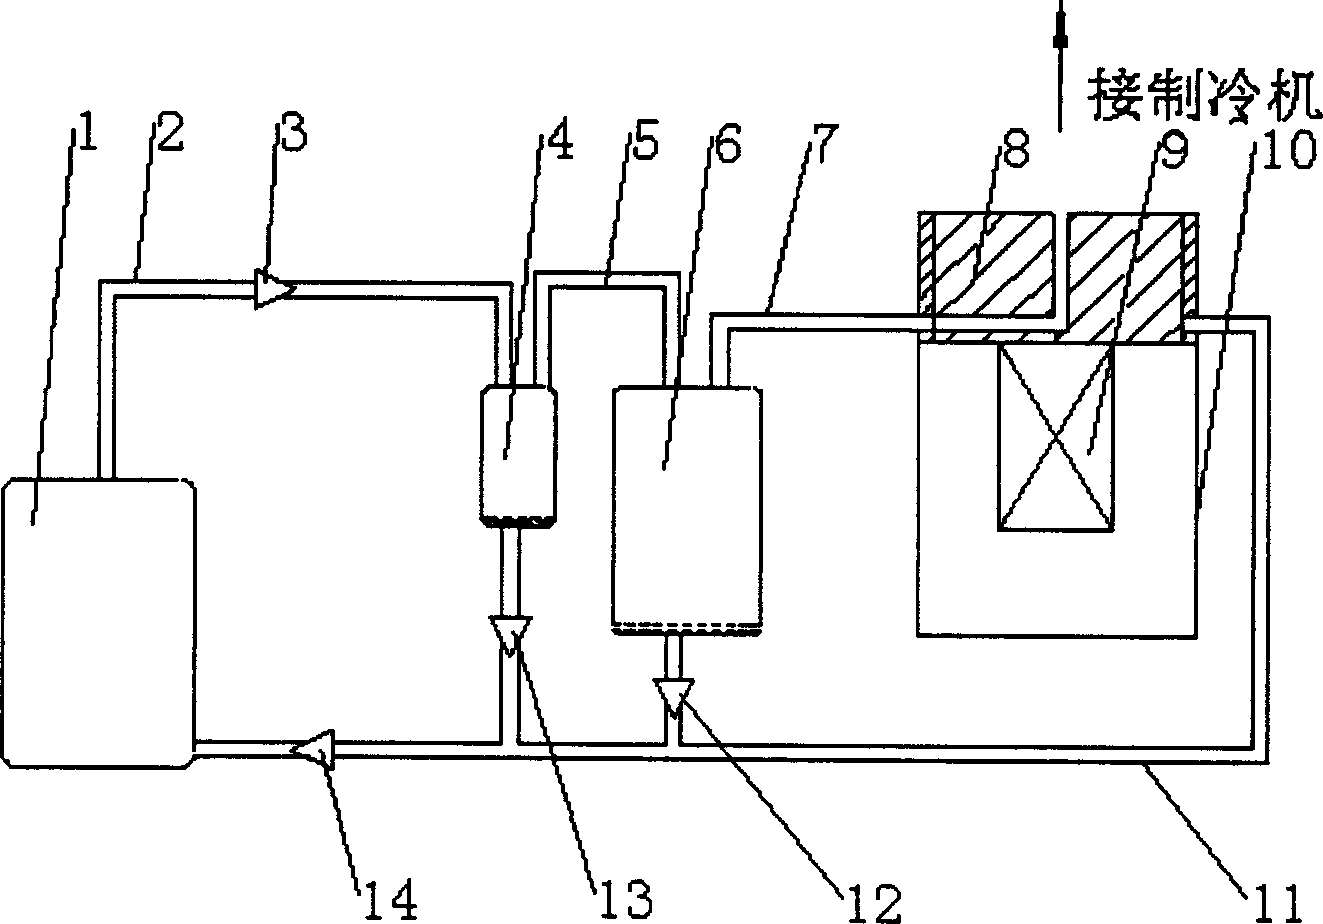 Compression wave generation system of cooling machine with compressor of constant oil lubricating flow